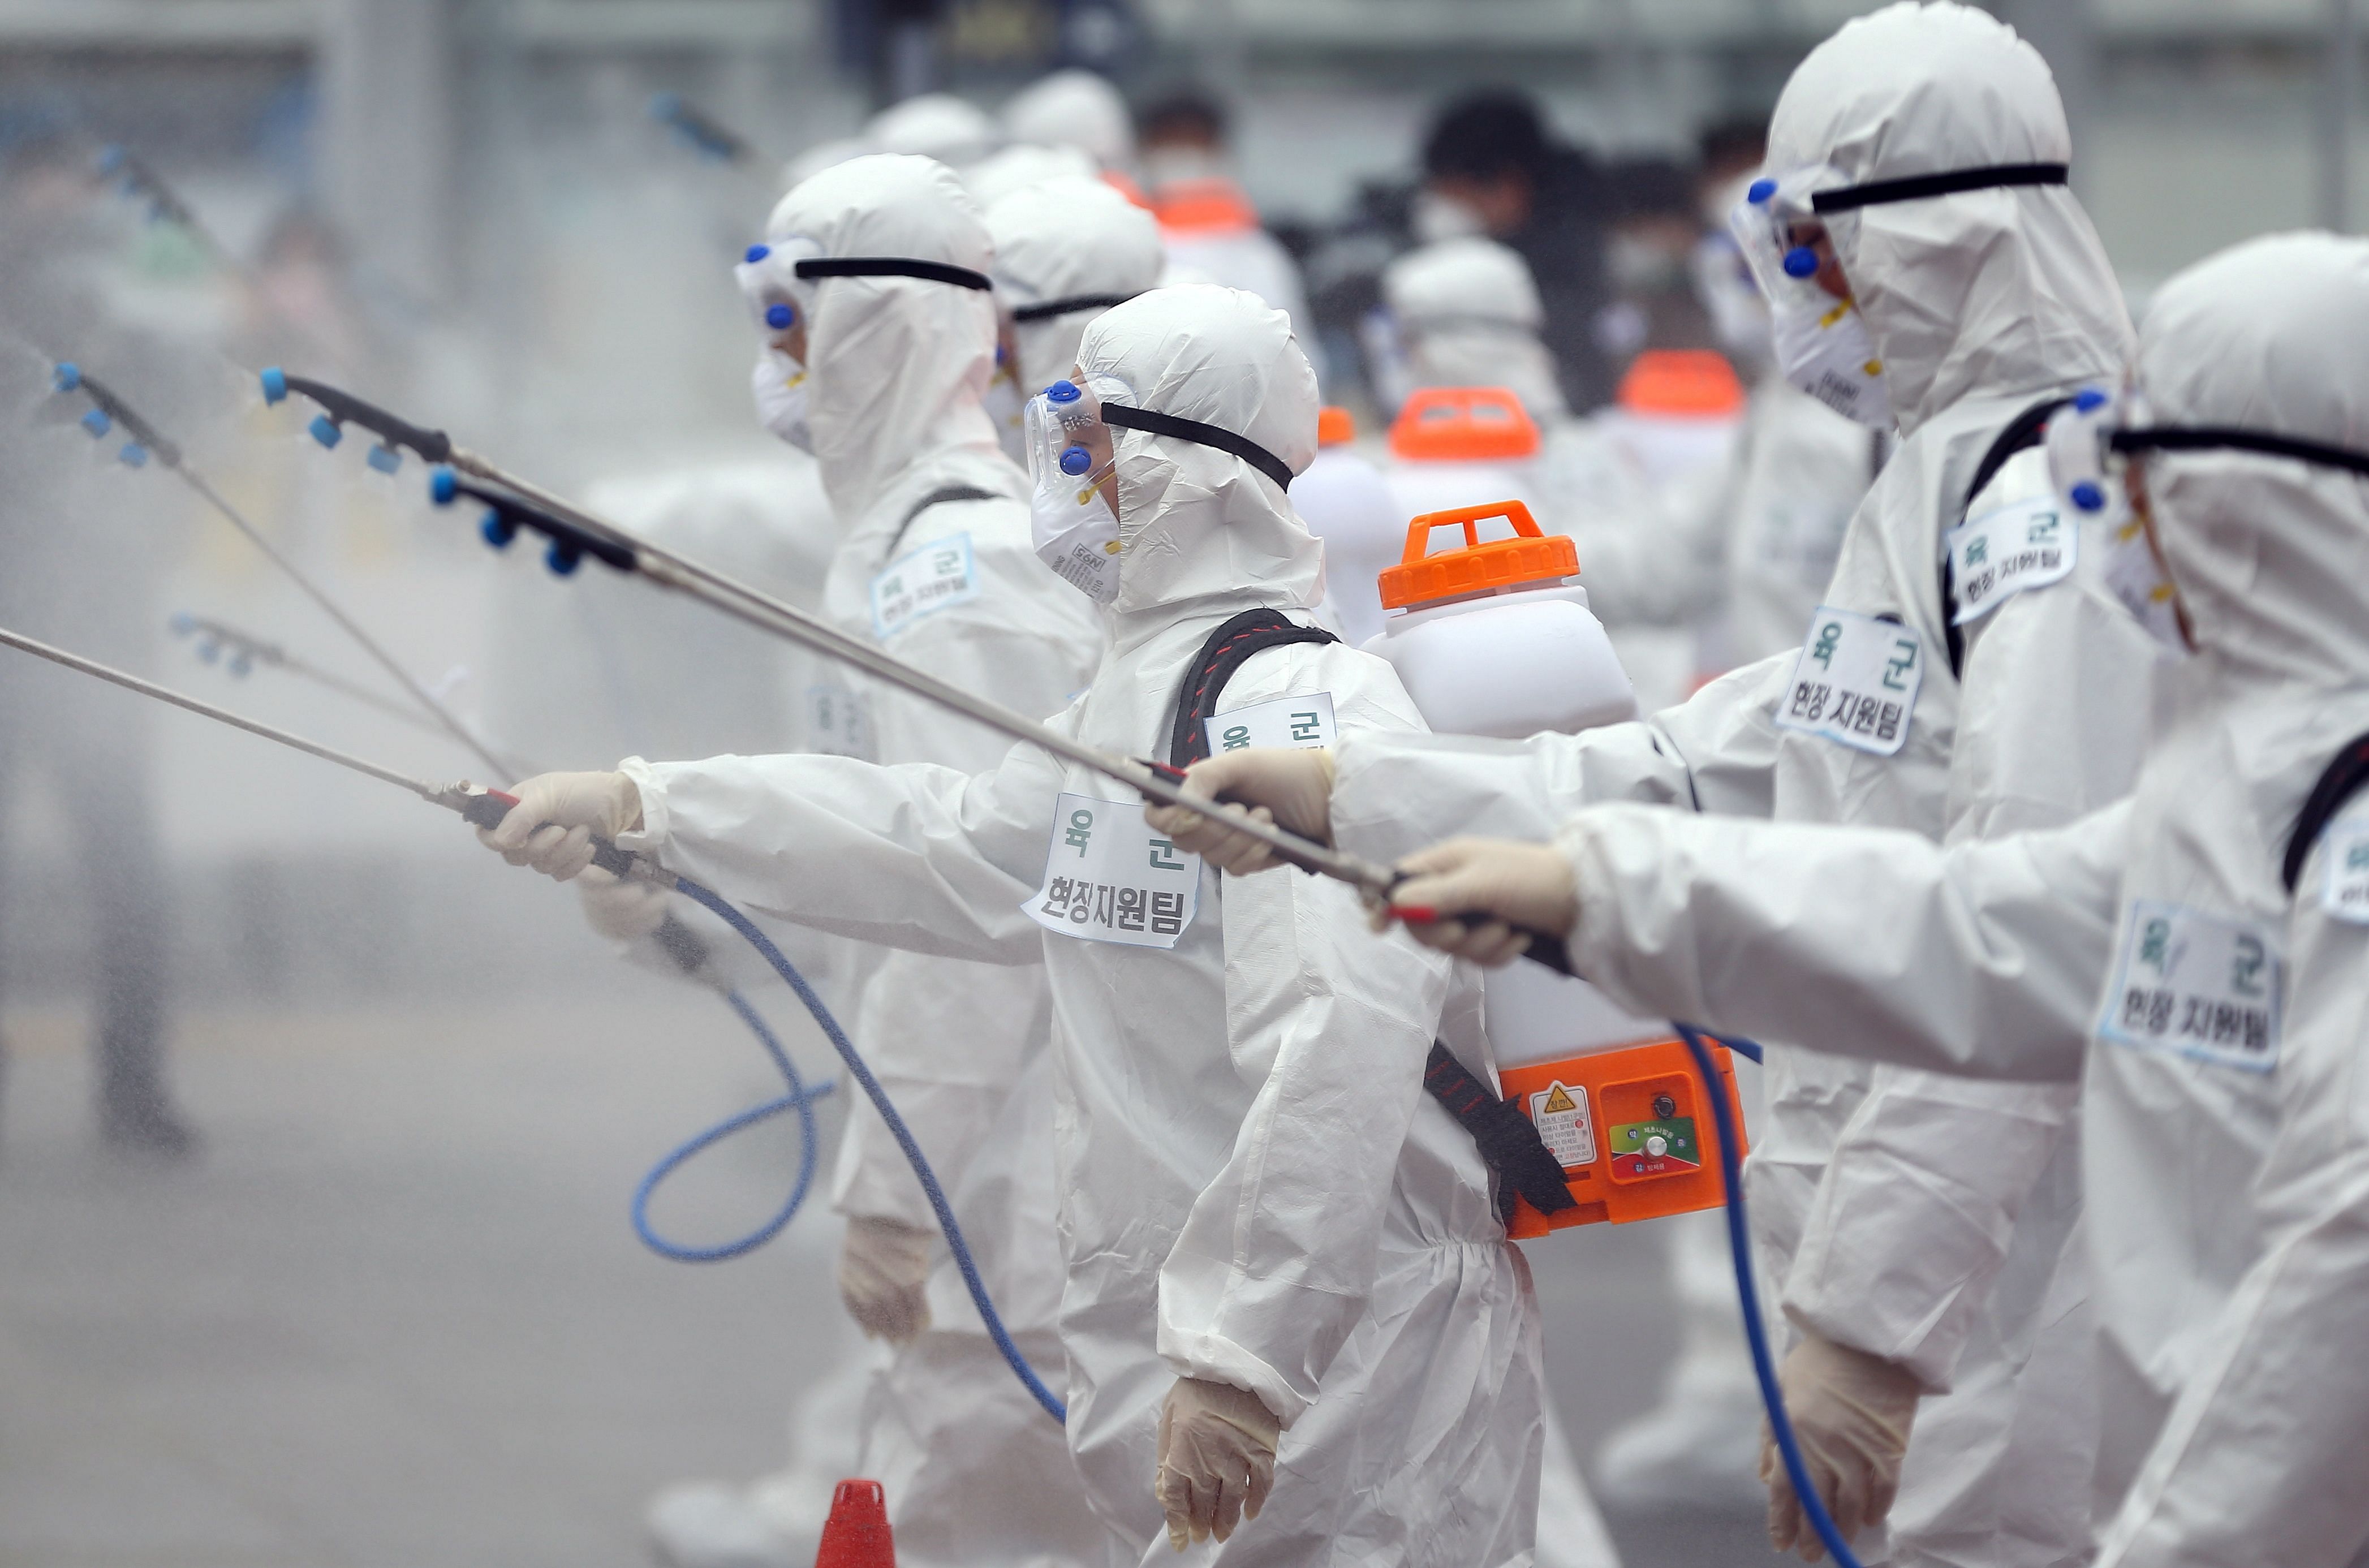 South Korean soldiers wearing protective gear spray disinfectant as part of preventive measures against the spread of the COVID-19 coronavirus, at Dongdaegu railway station in Daegu. (AFP Photo)